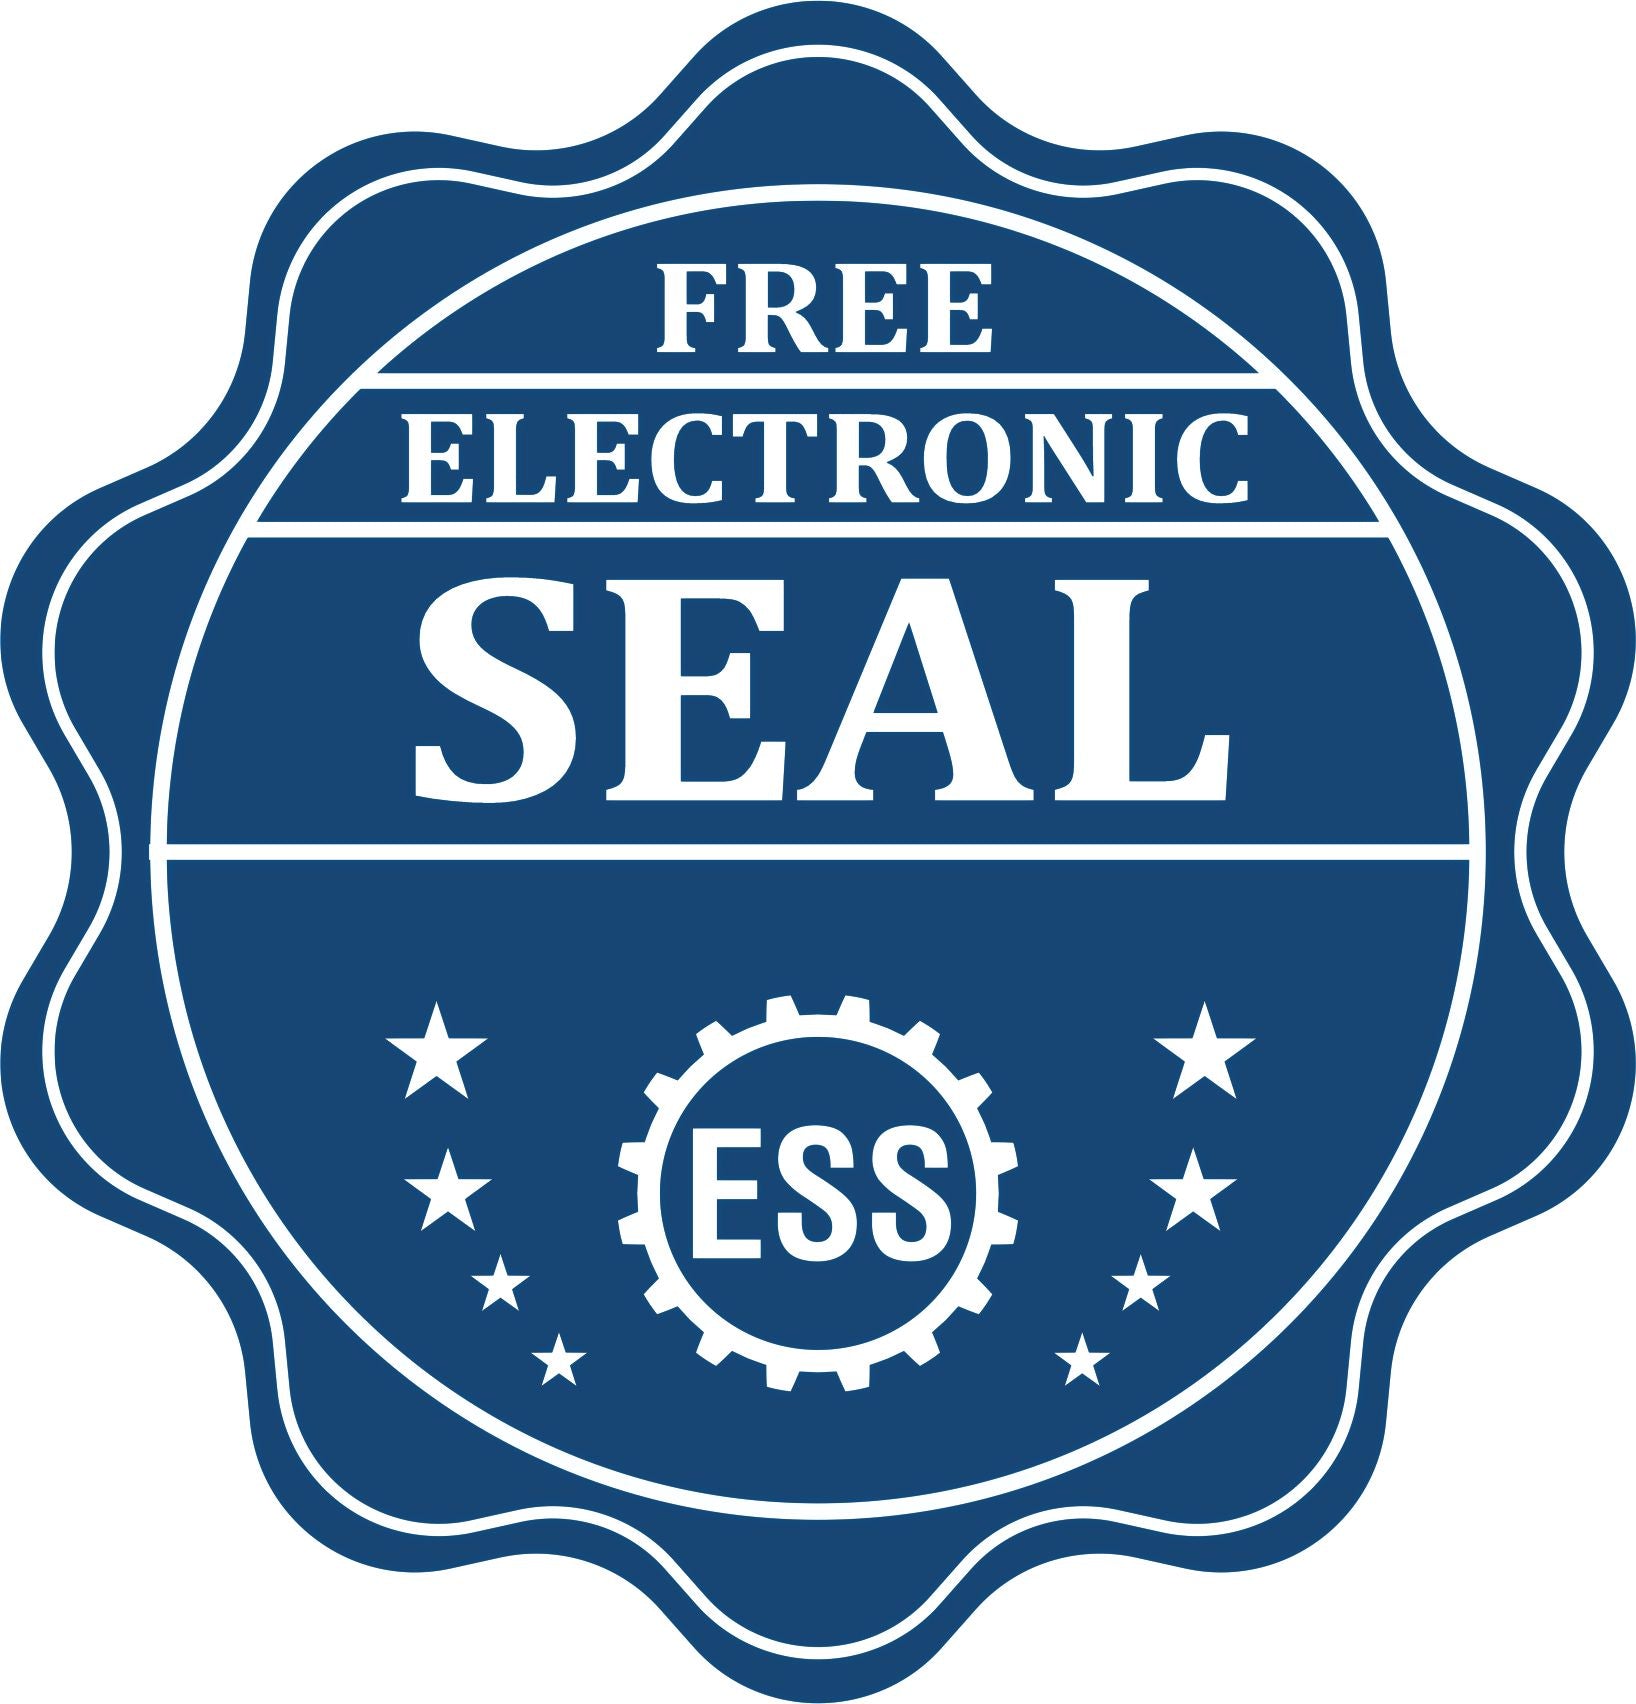 A badge showing a free electronic seal for the Slim Pre-Inked Mississippi Land Surveyor Seal Stamp with stars and the ESS gear on the emblem.